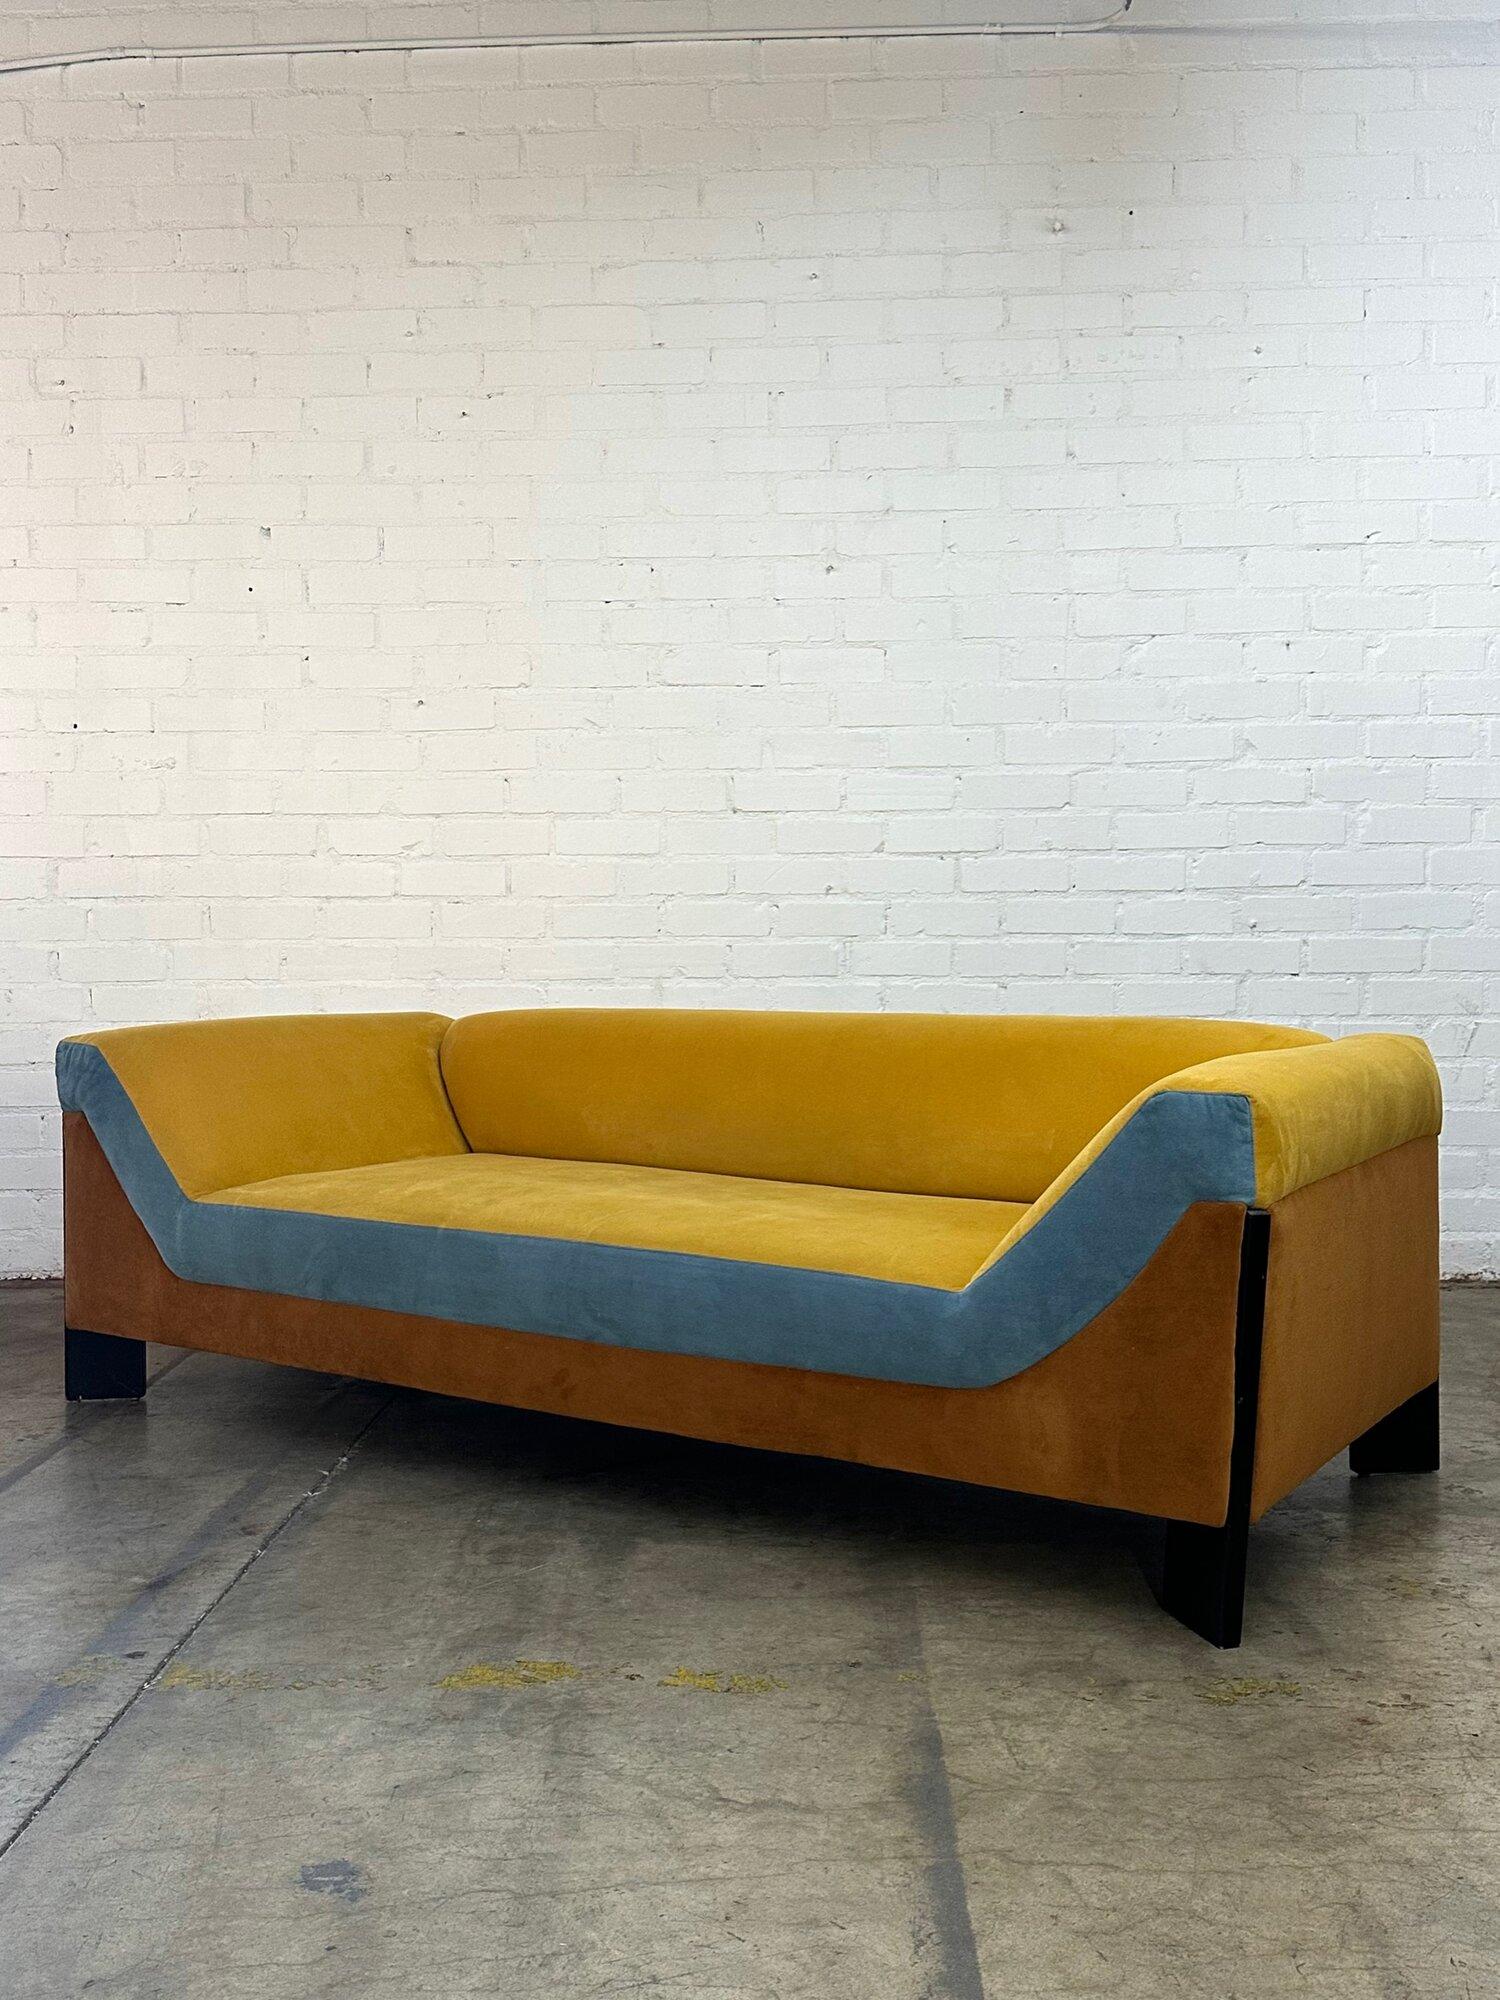 70's style couch